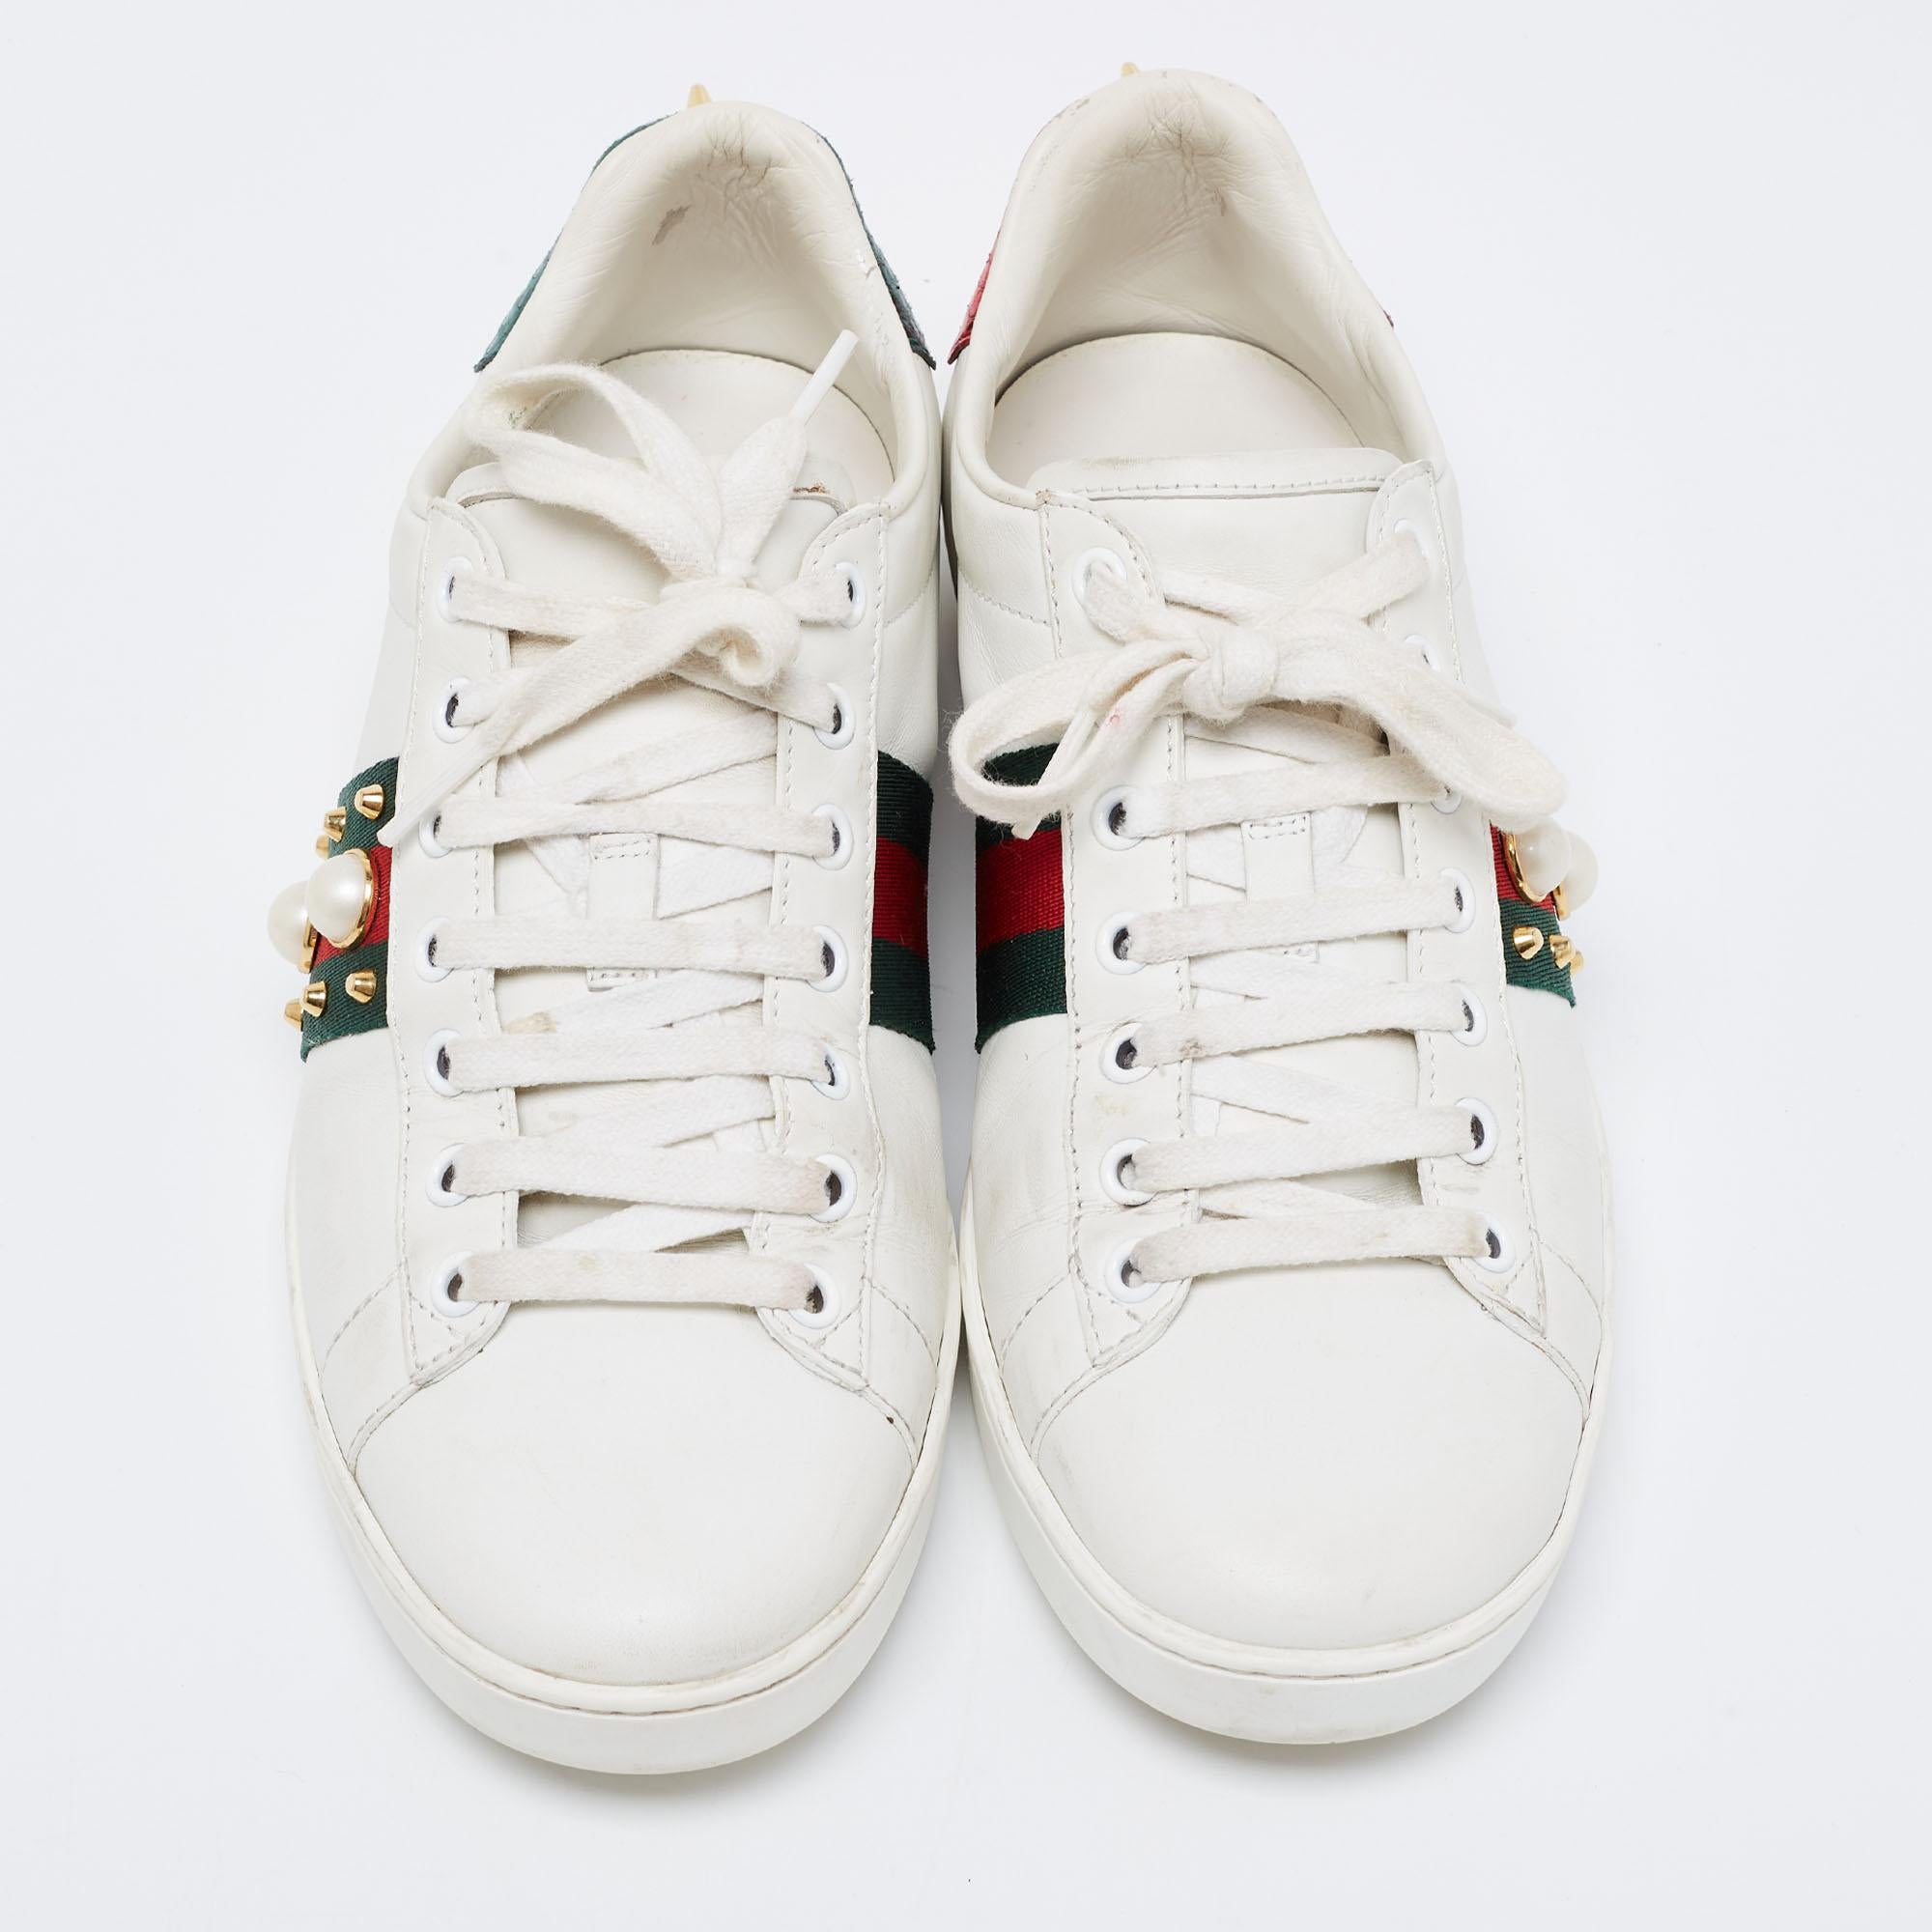 Stacked with signature details, this Gucci pair is rendered in leather and is designed in a low-cut style with lace-up vamps. They have been fashioned with iconic web stripes, studs, and faux pearls on the sides. Complete with red and green